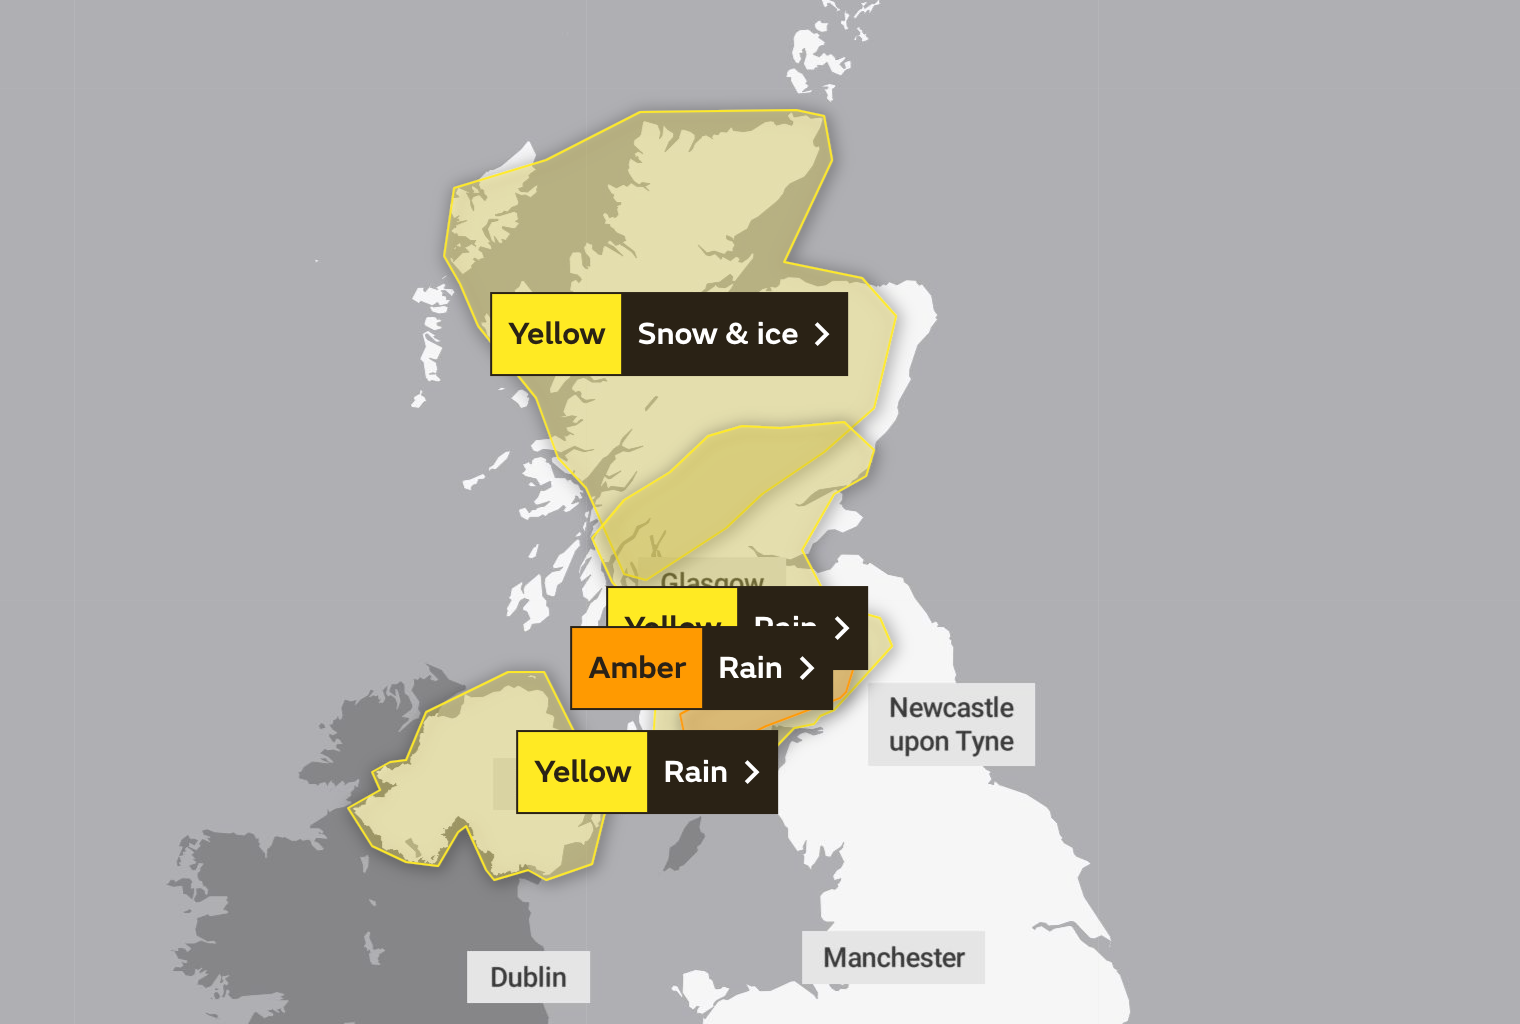 Four weather alerts have been issued across the UK for Friday, including warnings for heavy rain, flooding, snow and ice